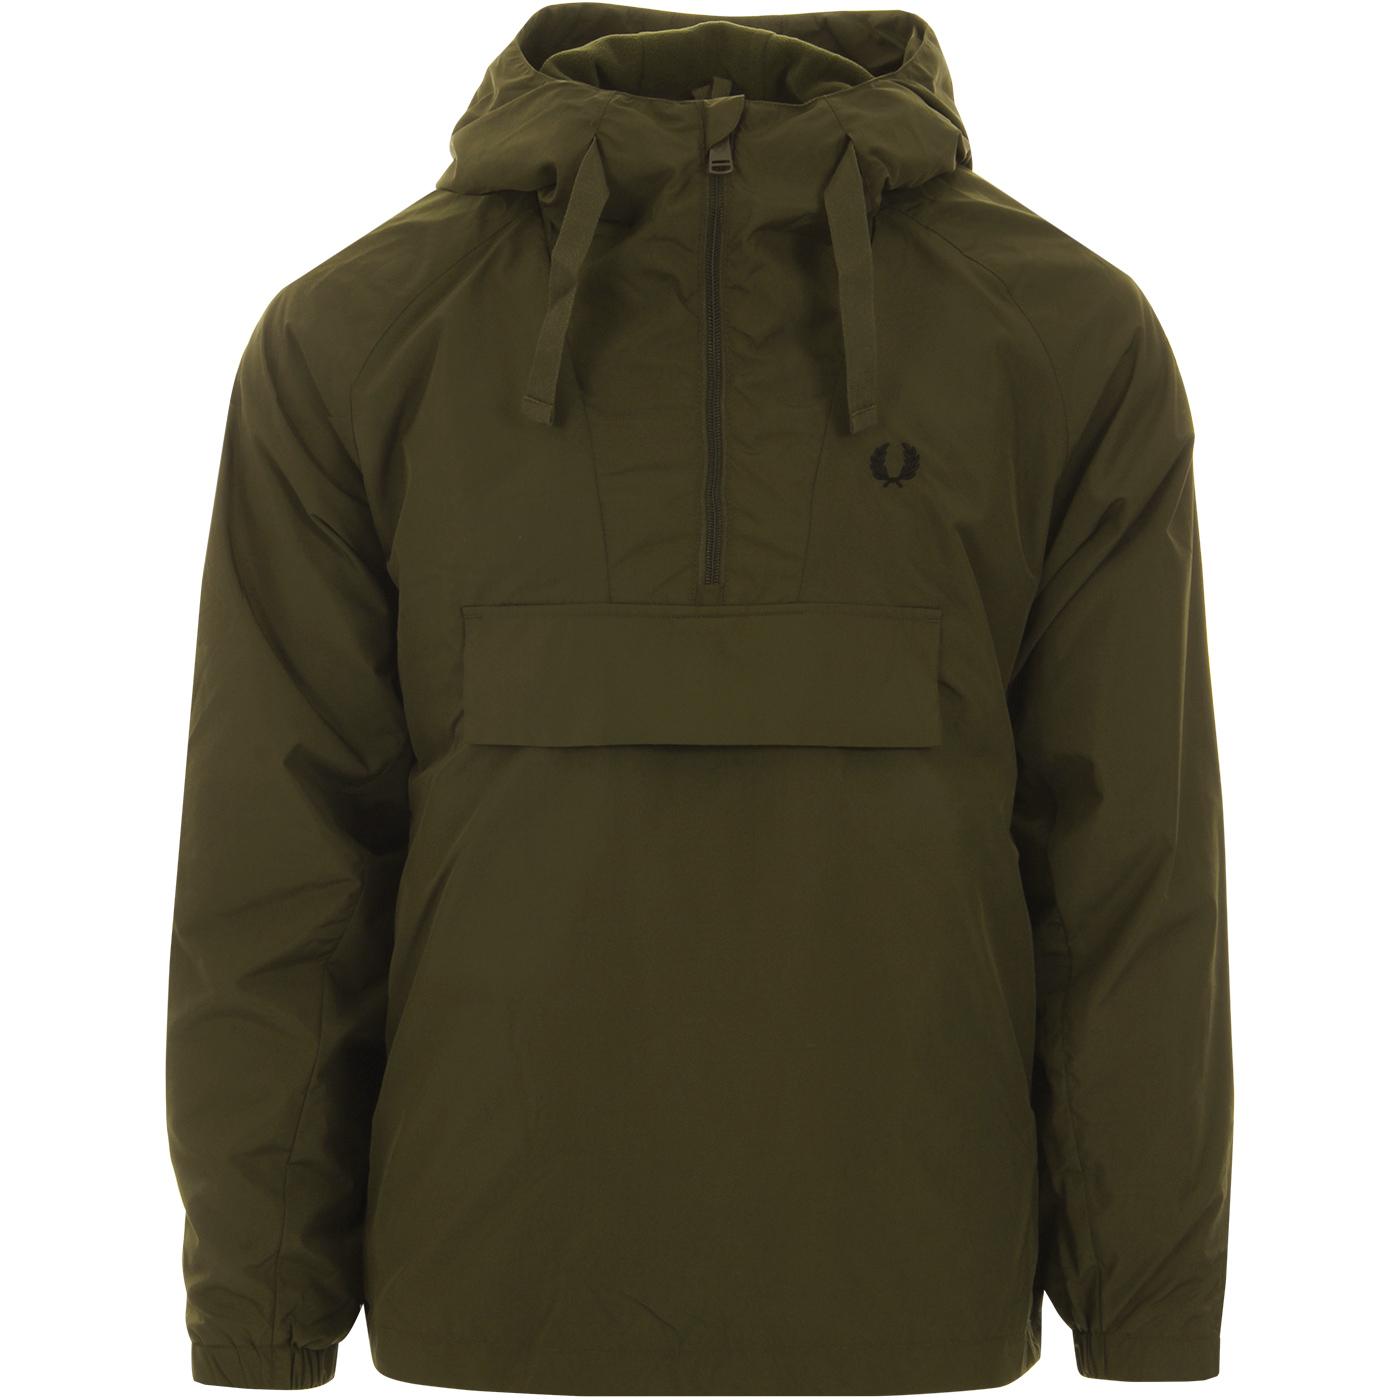 FRED PERRY Men's Mod Overhead Ripstop Jacket Dark Thorn